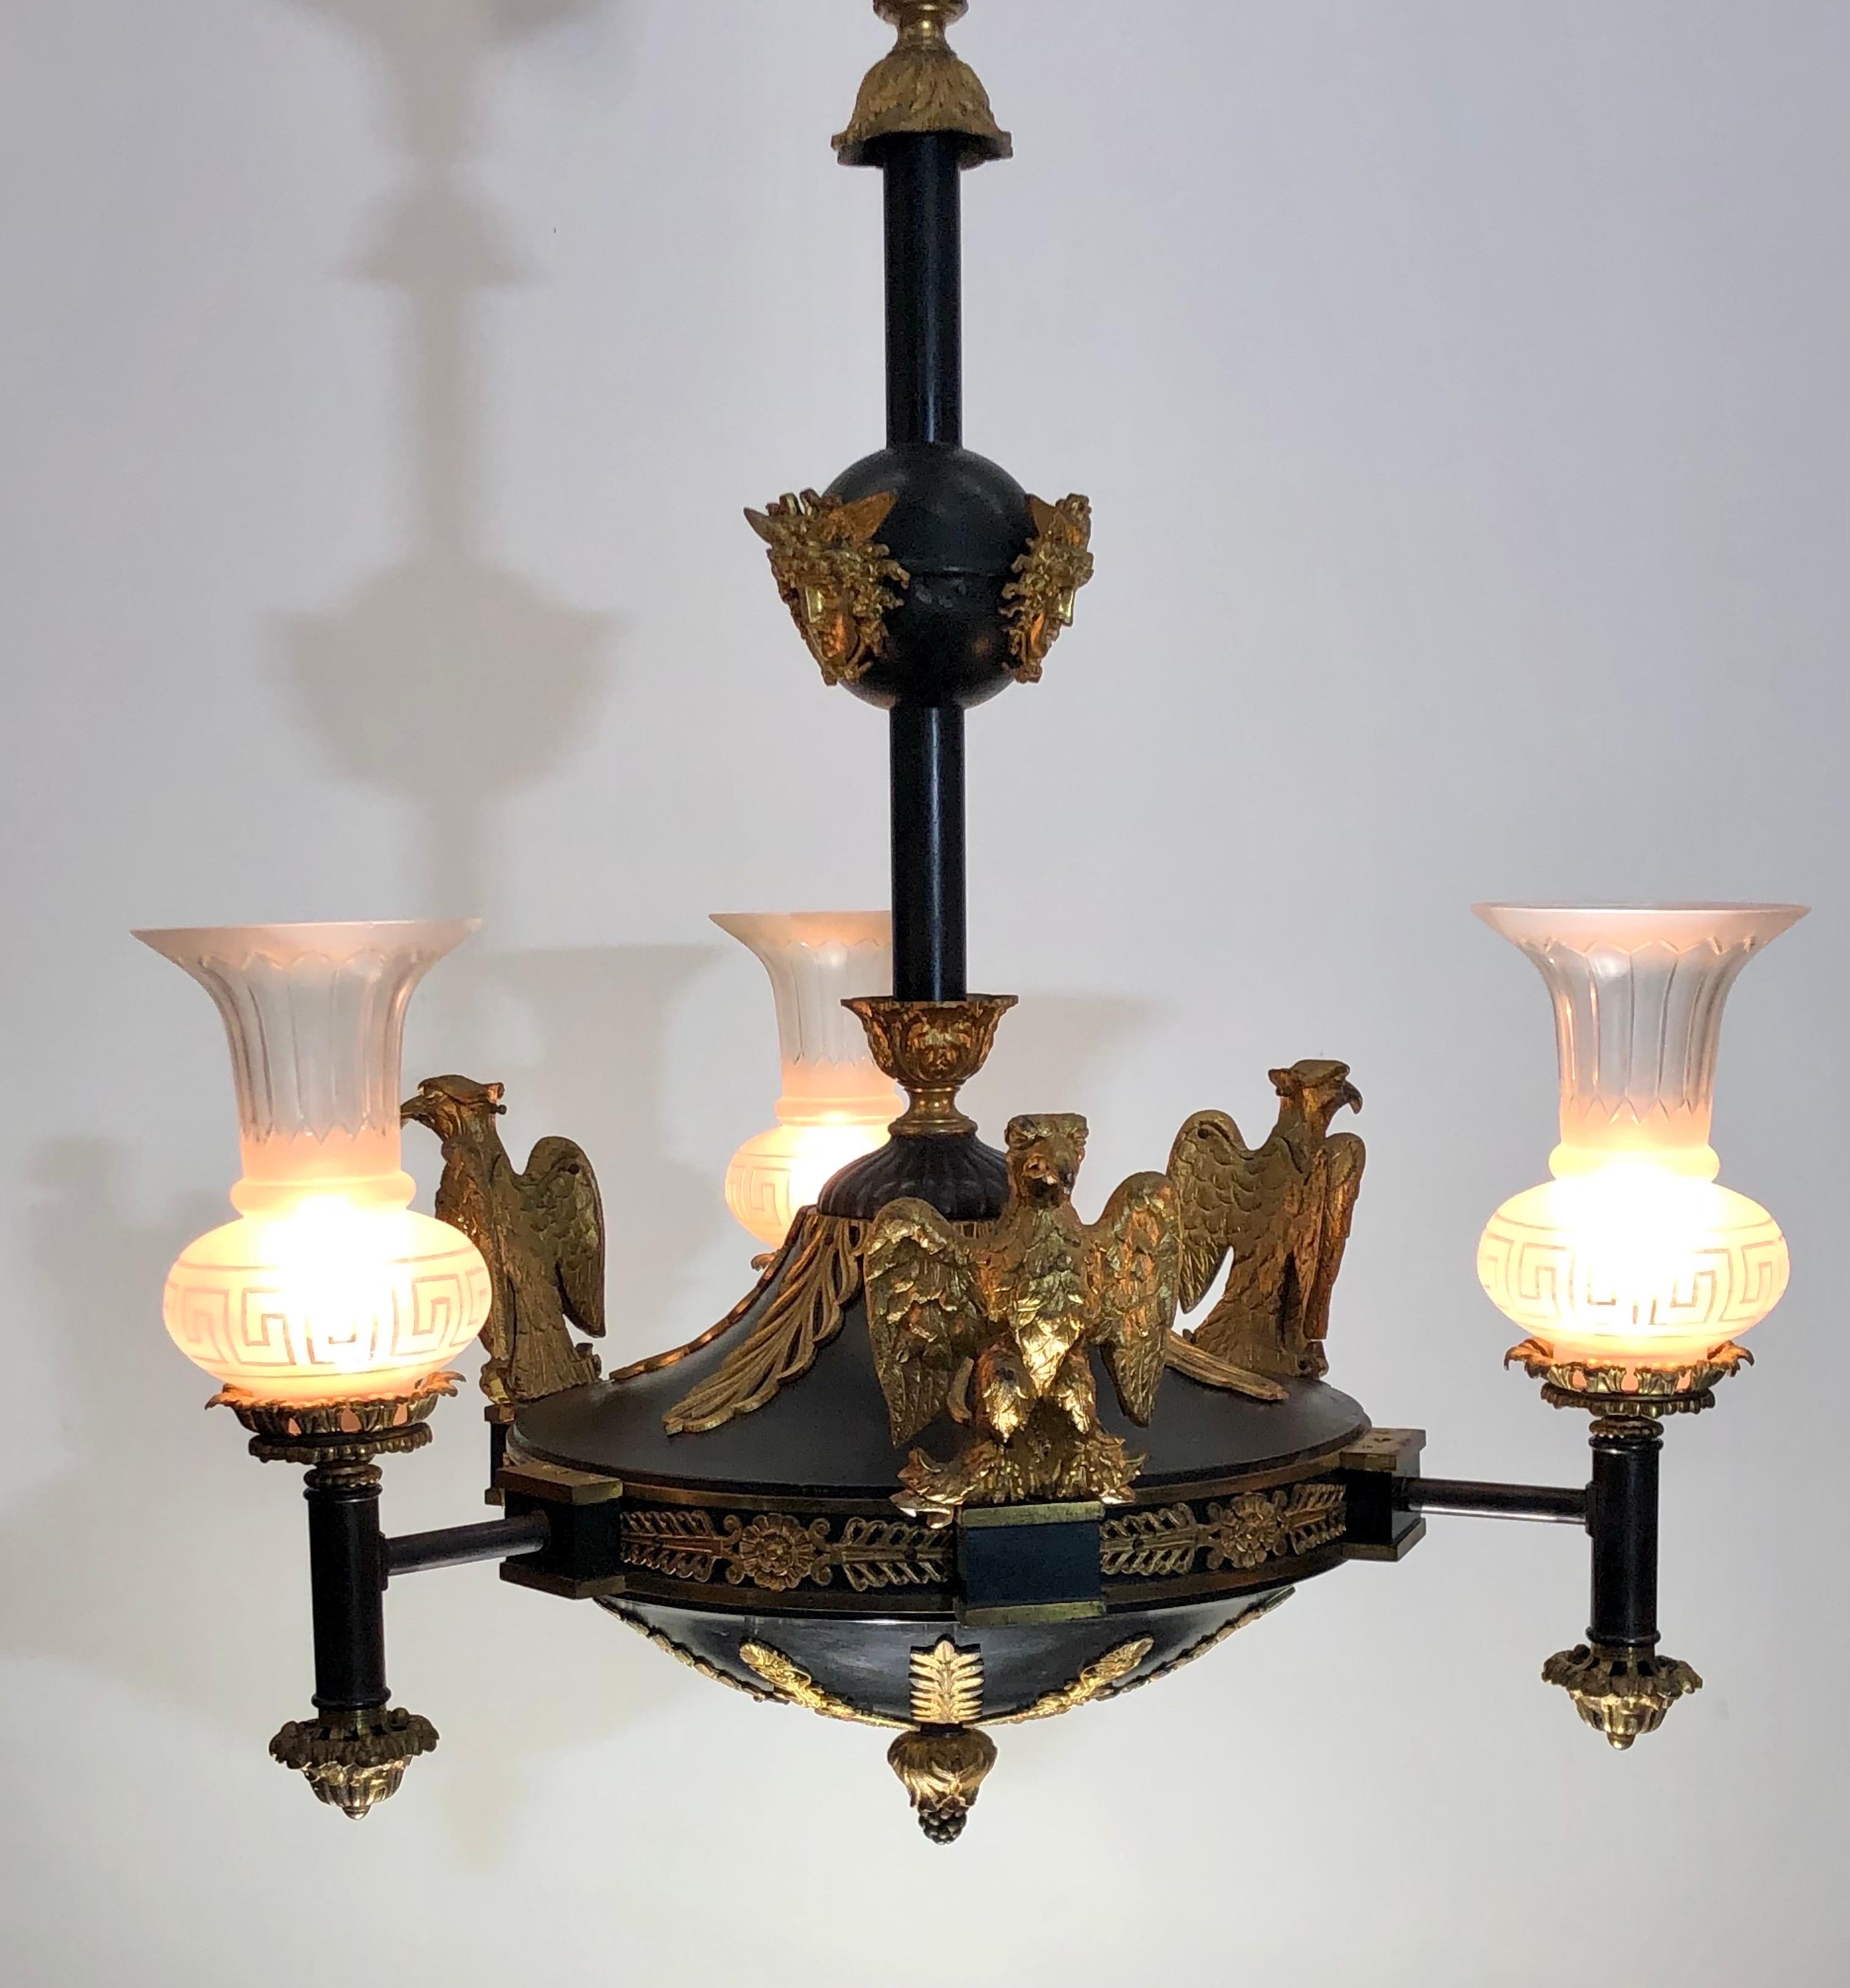  Medusa Rondanini and Eagle Mounted French Empire Bronze Gasolier / Chandelier In Good Condition For Sale In Charleston, SC